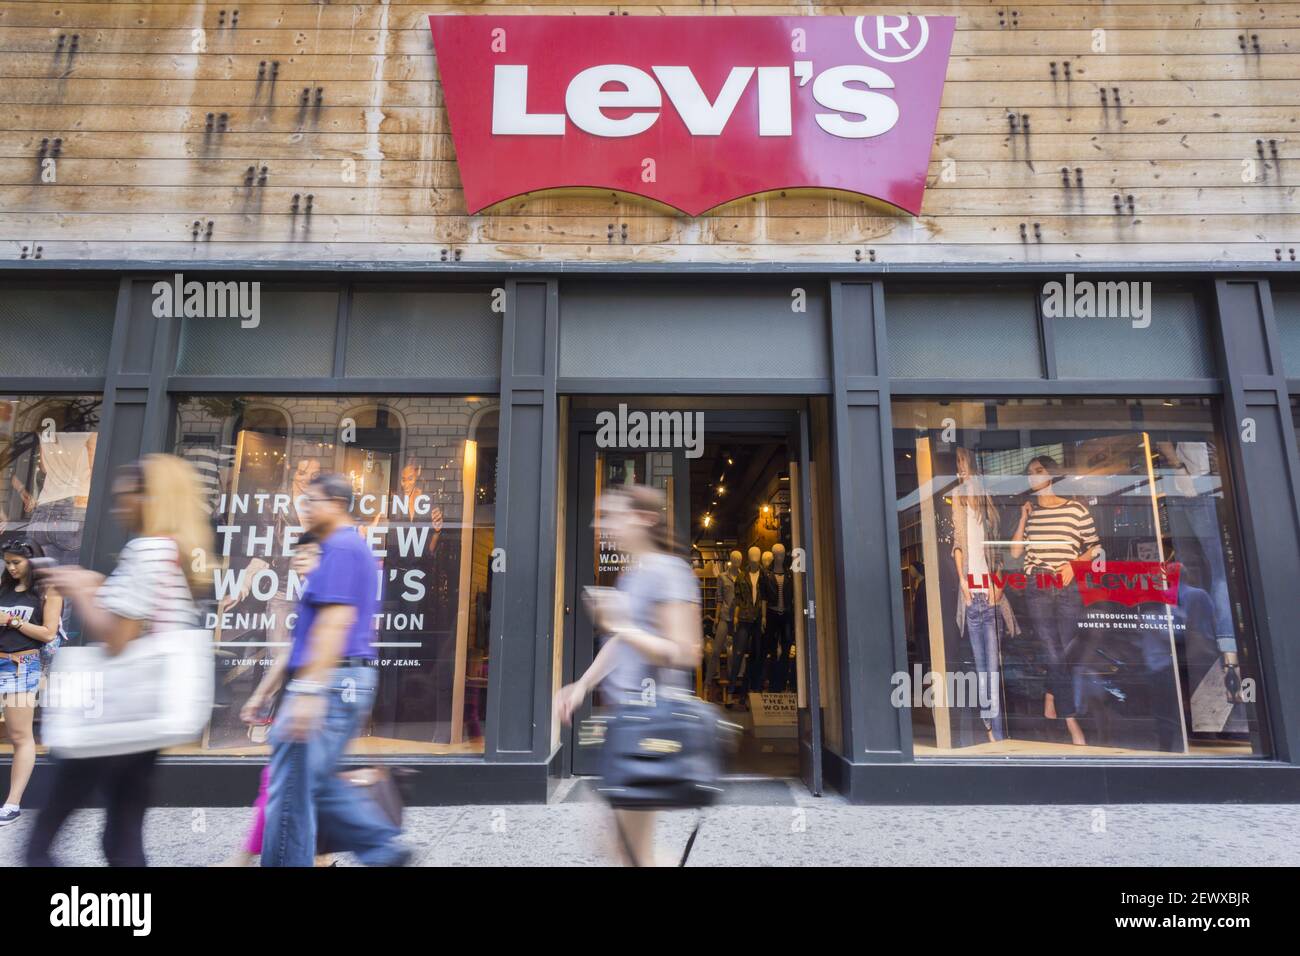 The Levi's store in Herald Square in New York on Friday, July 24, 2015. The  145 year old Levi Strauss & co. is reported to be planing an initial public  offering possibly